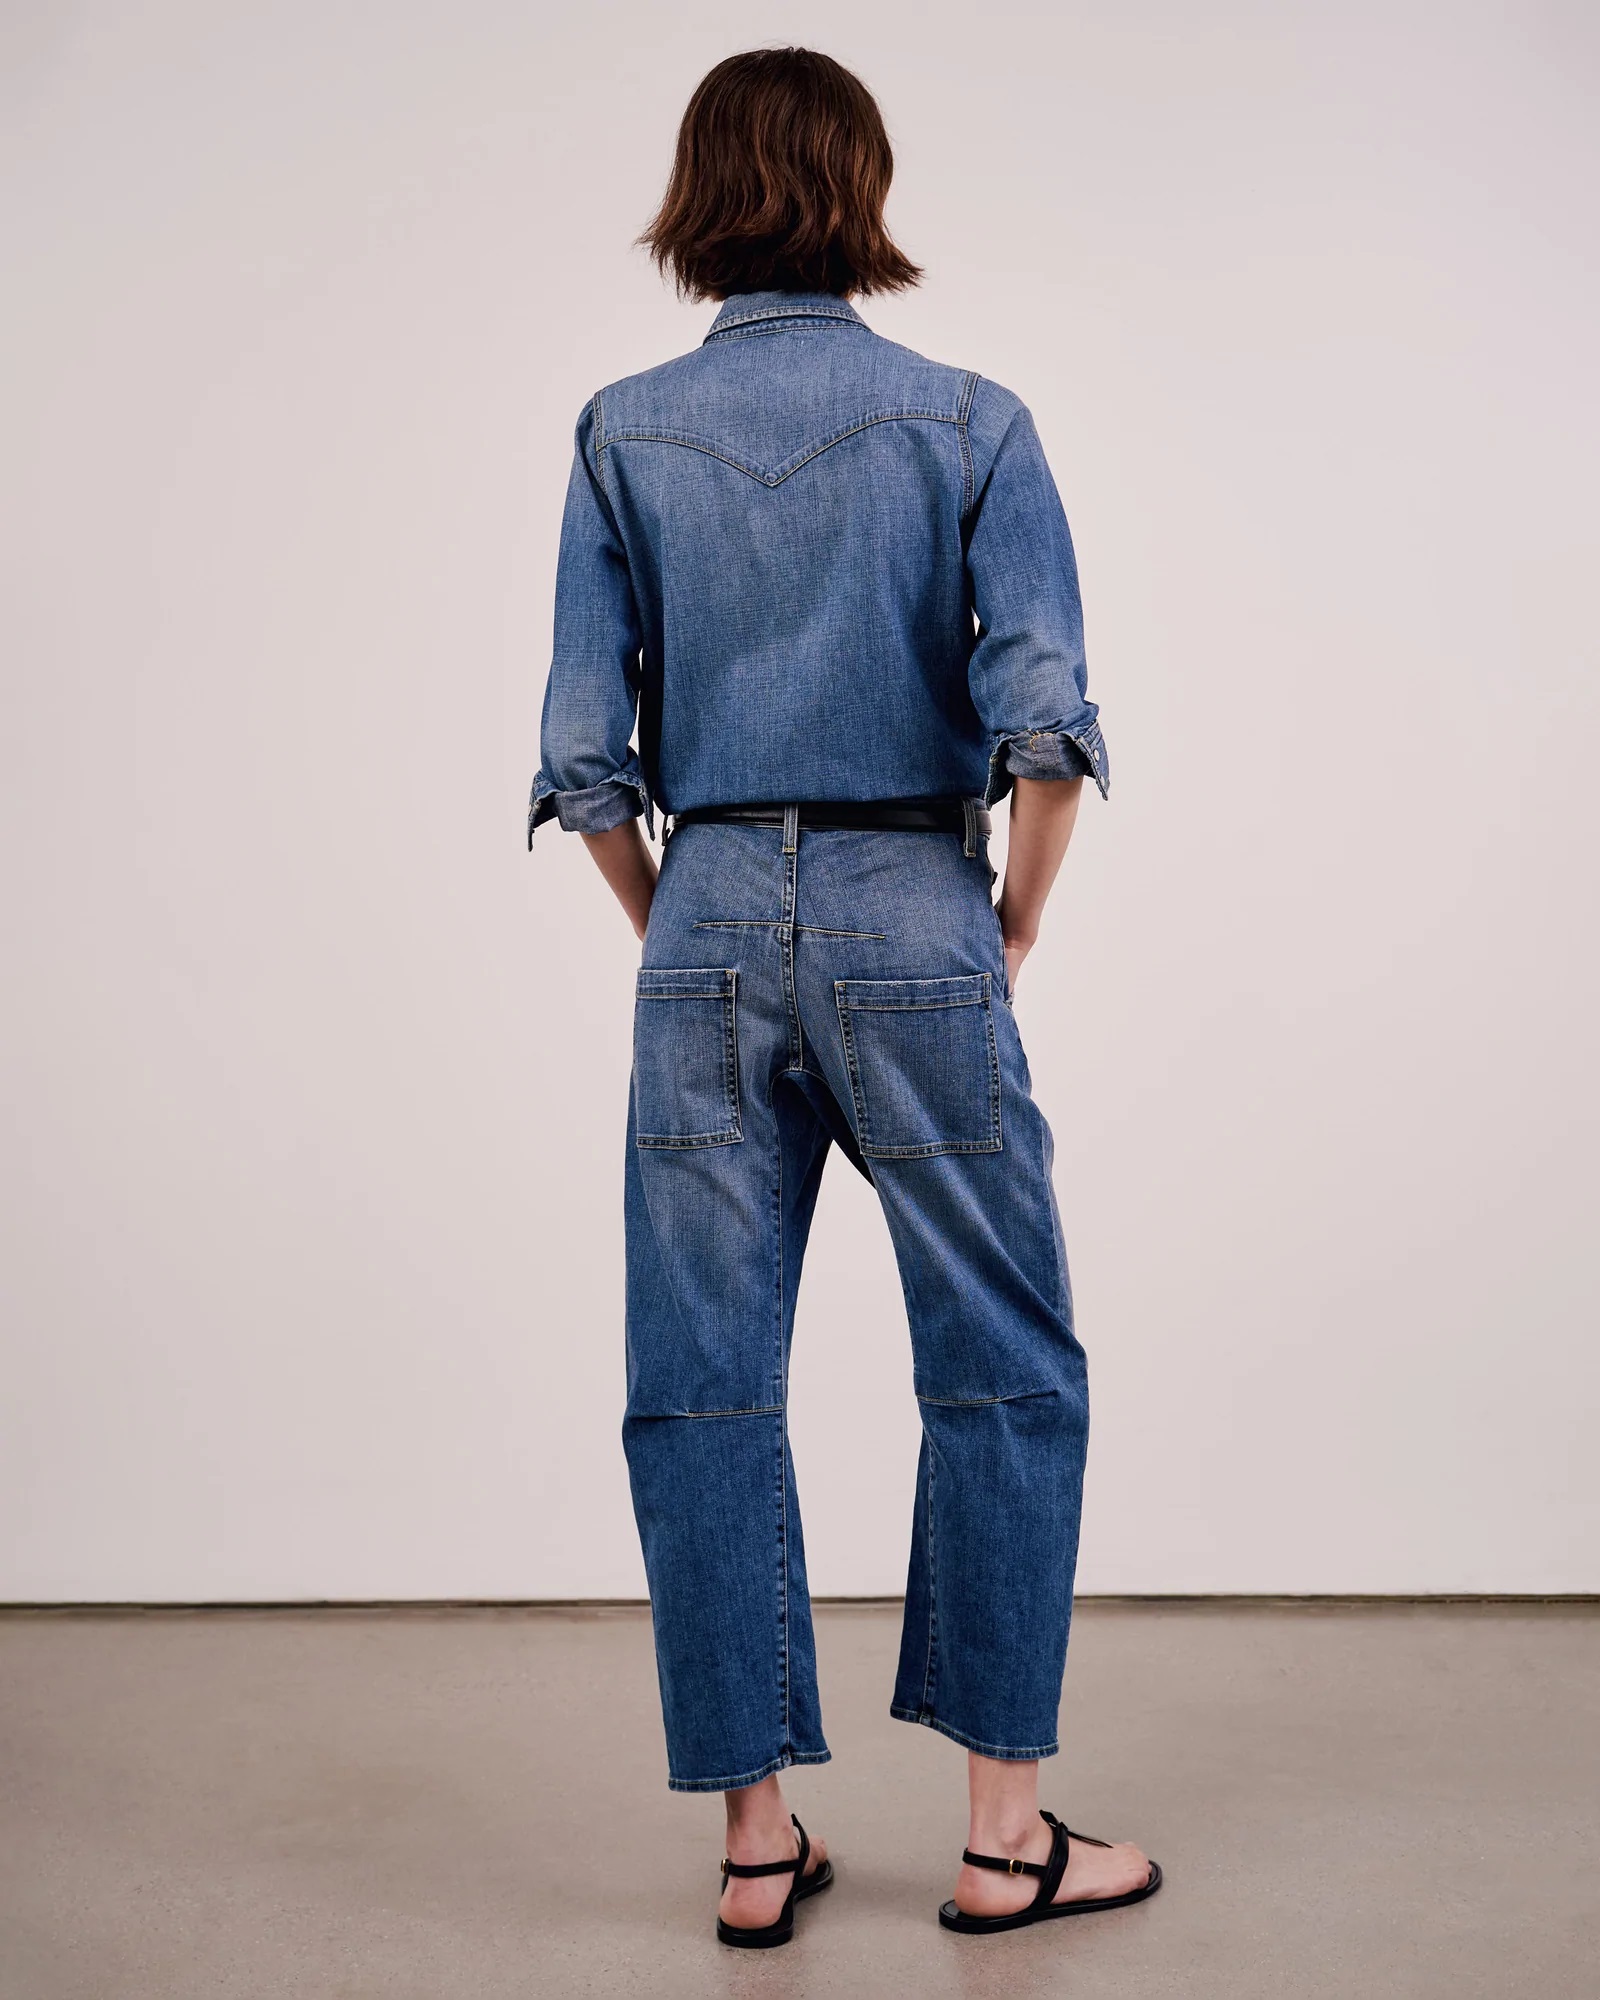 Nili Lotan Emerson Jeans in Classic Washed